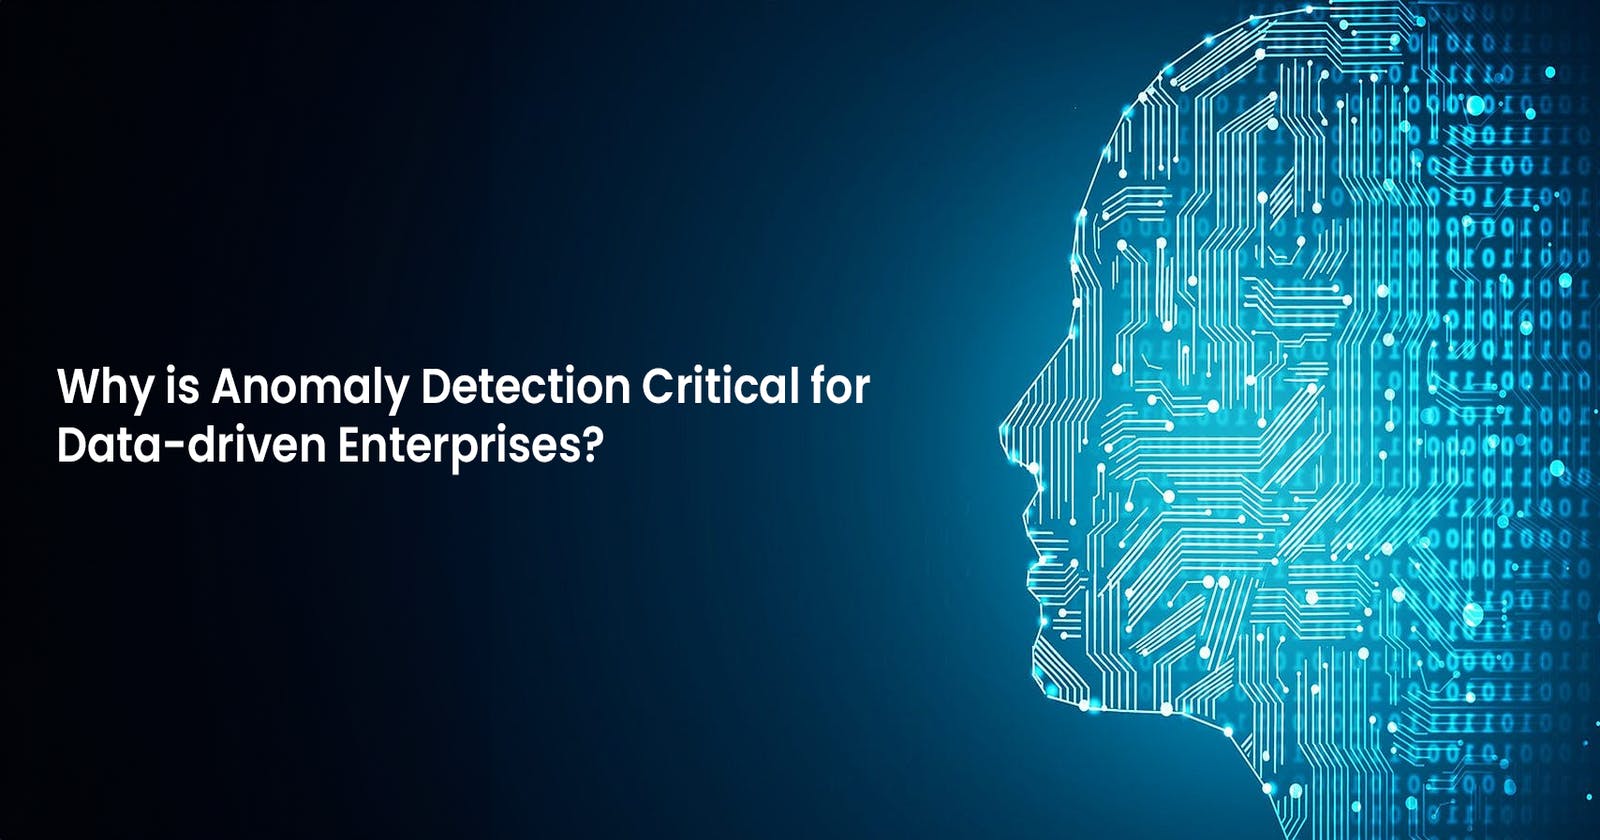 Why is Anomaly Detection Critical for Data-driven Enterprises?